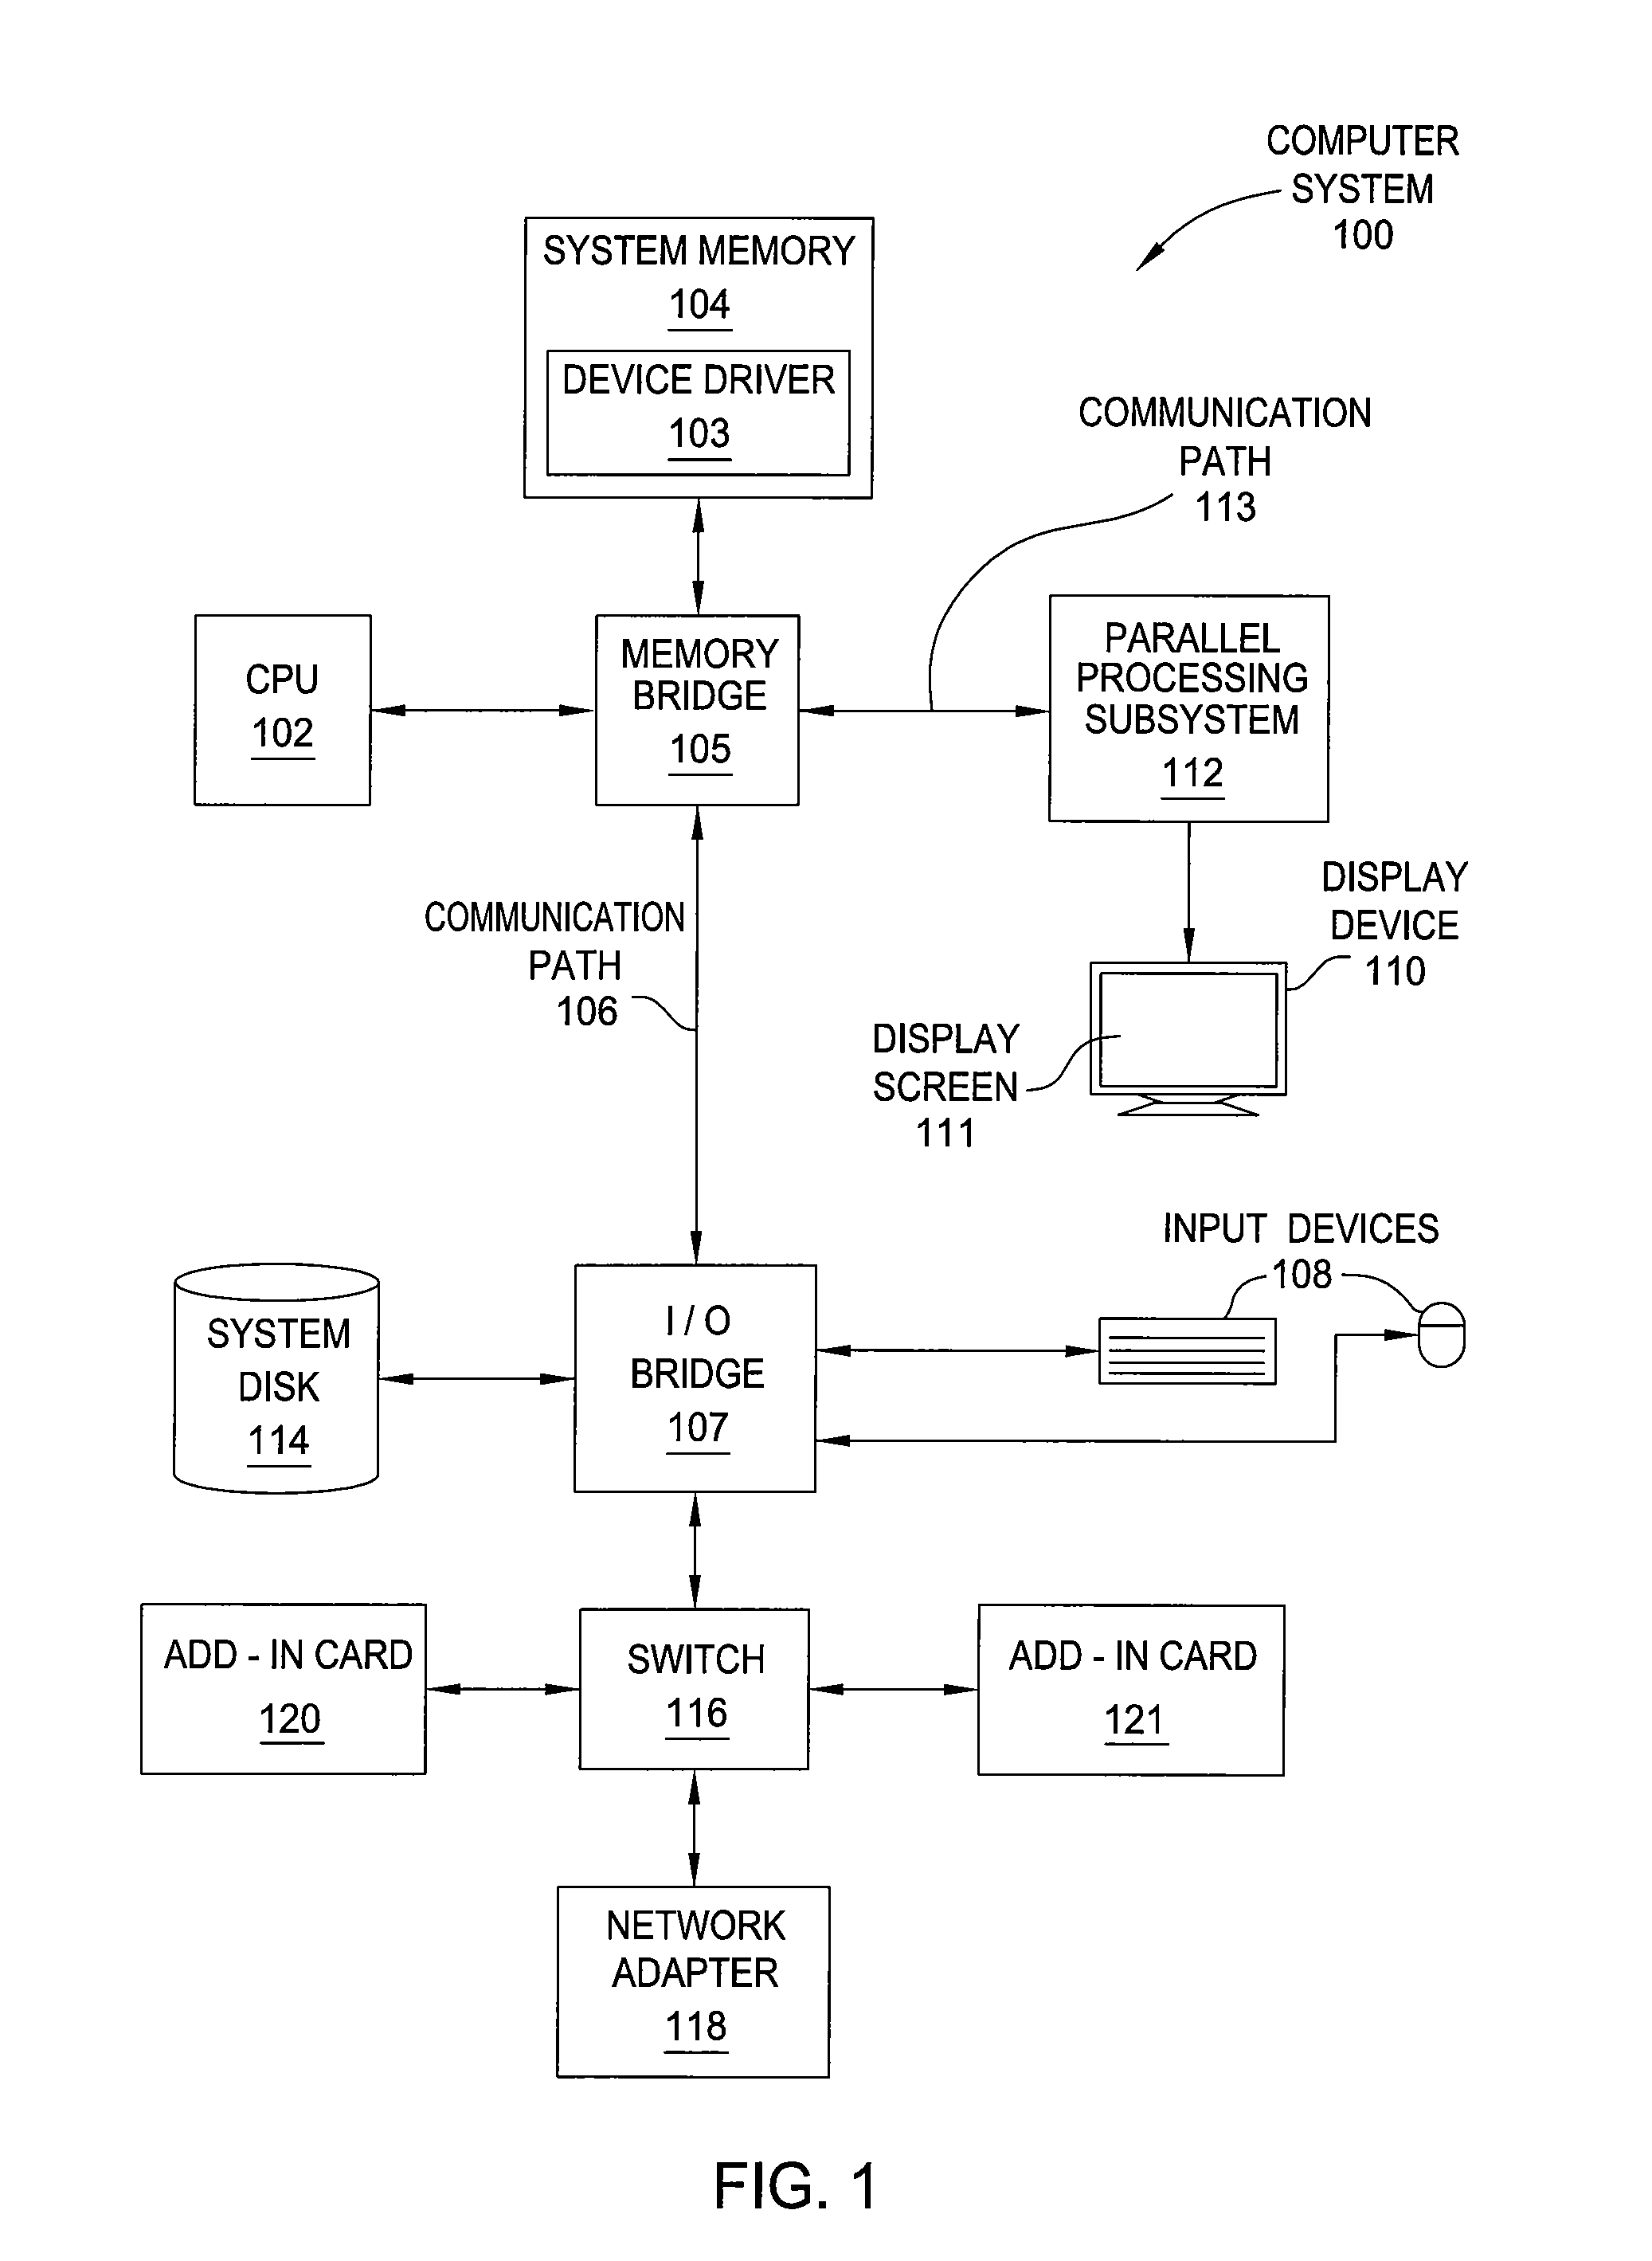 Thread group scheduler for computing on a parallel thread processor